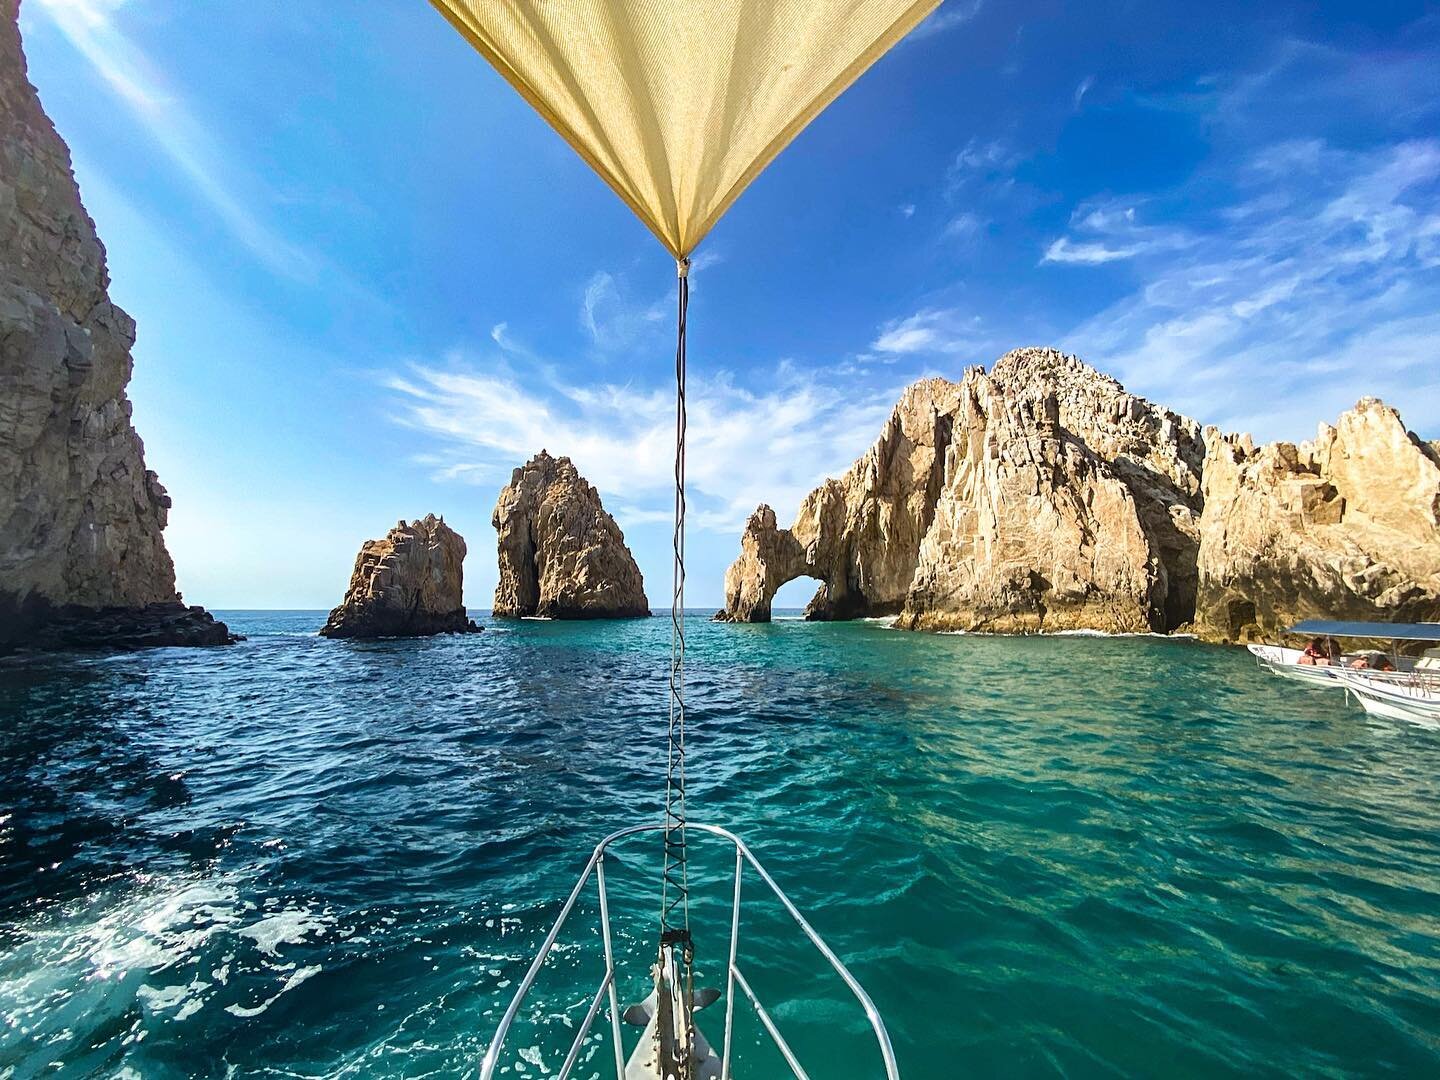 Grab your flippy floppies, because we&rsquo;re going ON A BOAT. Don&rsquo;t worry, the hardest decision you&rsquo;ll have to make is &lsquo;snorkeling&rsquo; or &lsquo;sunset&rsquo;!
⁣
🆆🅷🅰🆃 Cabo&rsquo;s best private, spacious 48 ft. Catamaran to 